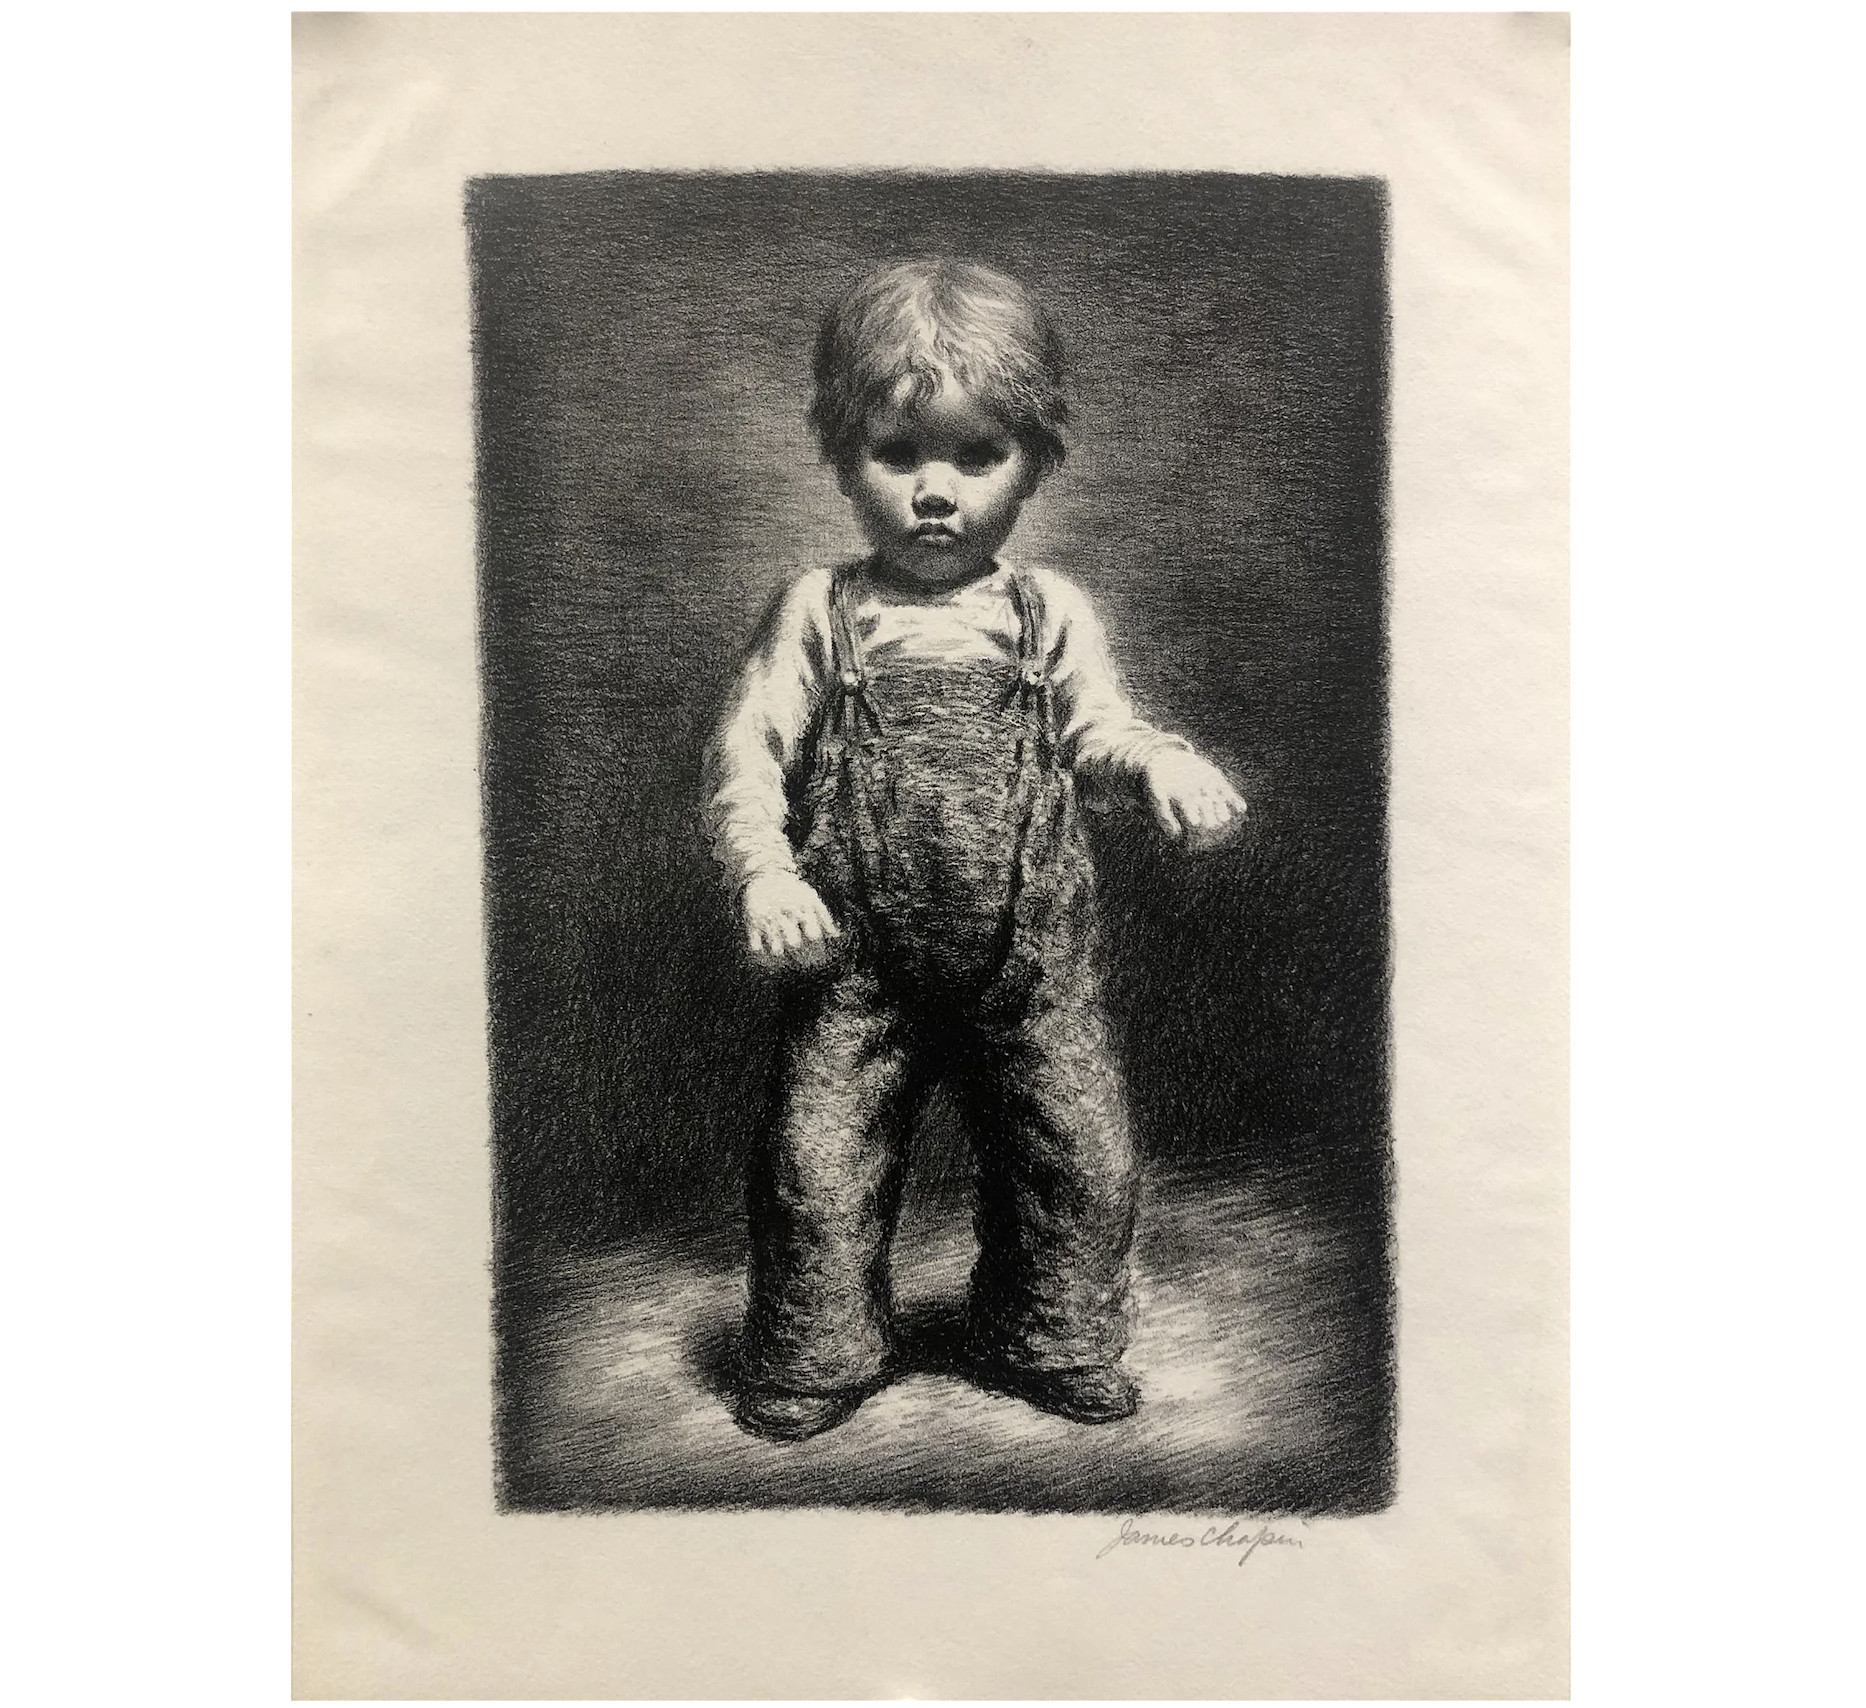 AW8-009: James Ormsbee Chapin - Circa 1943 - Lithograph - "Standing Child"